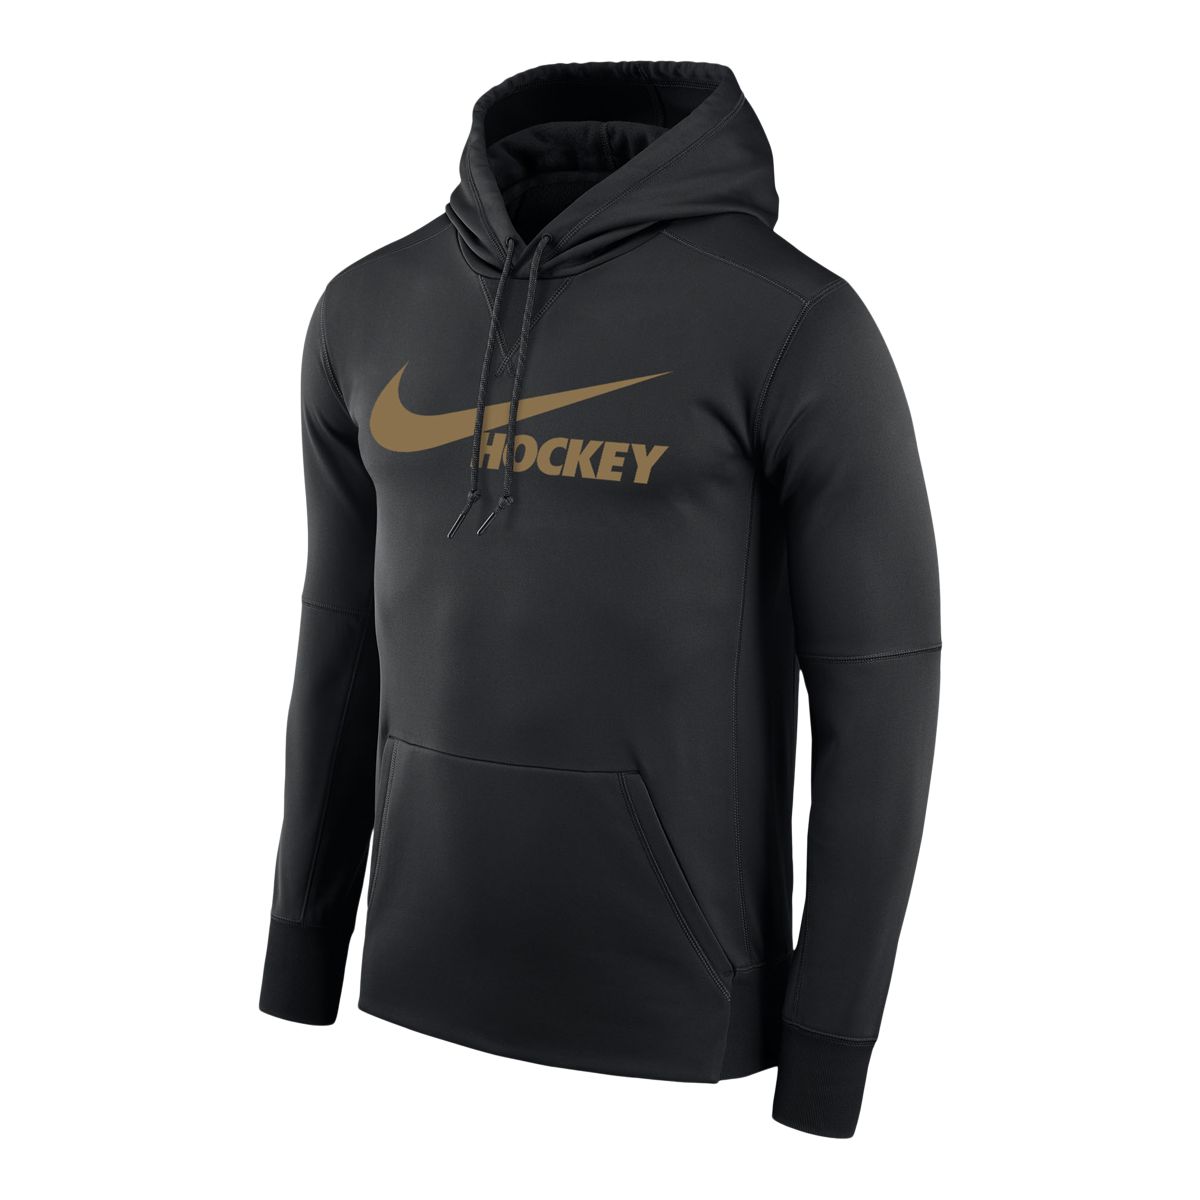 NIKE NATIONALS THERMA HOODIE PULLOVER ZIPPER POCKET (GRAY)